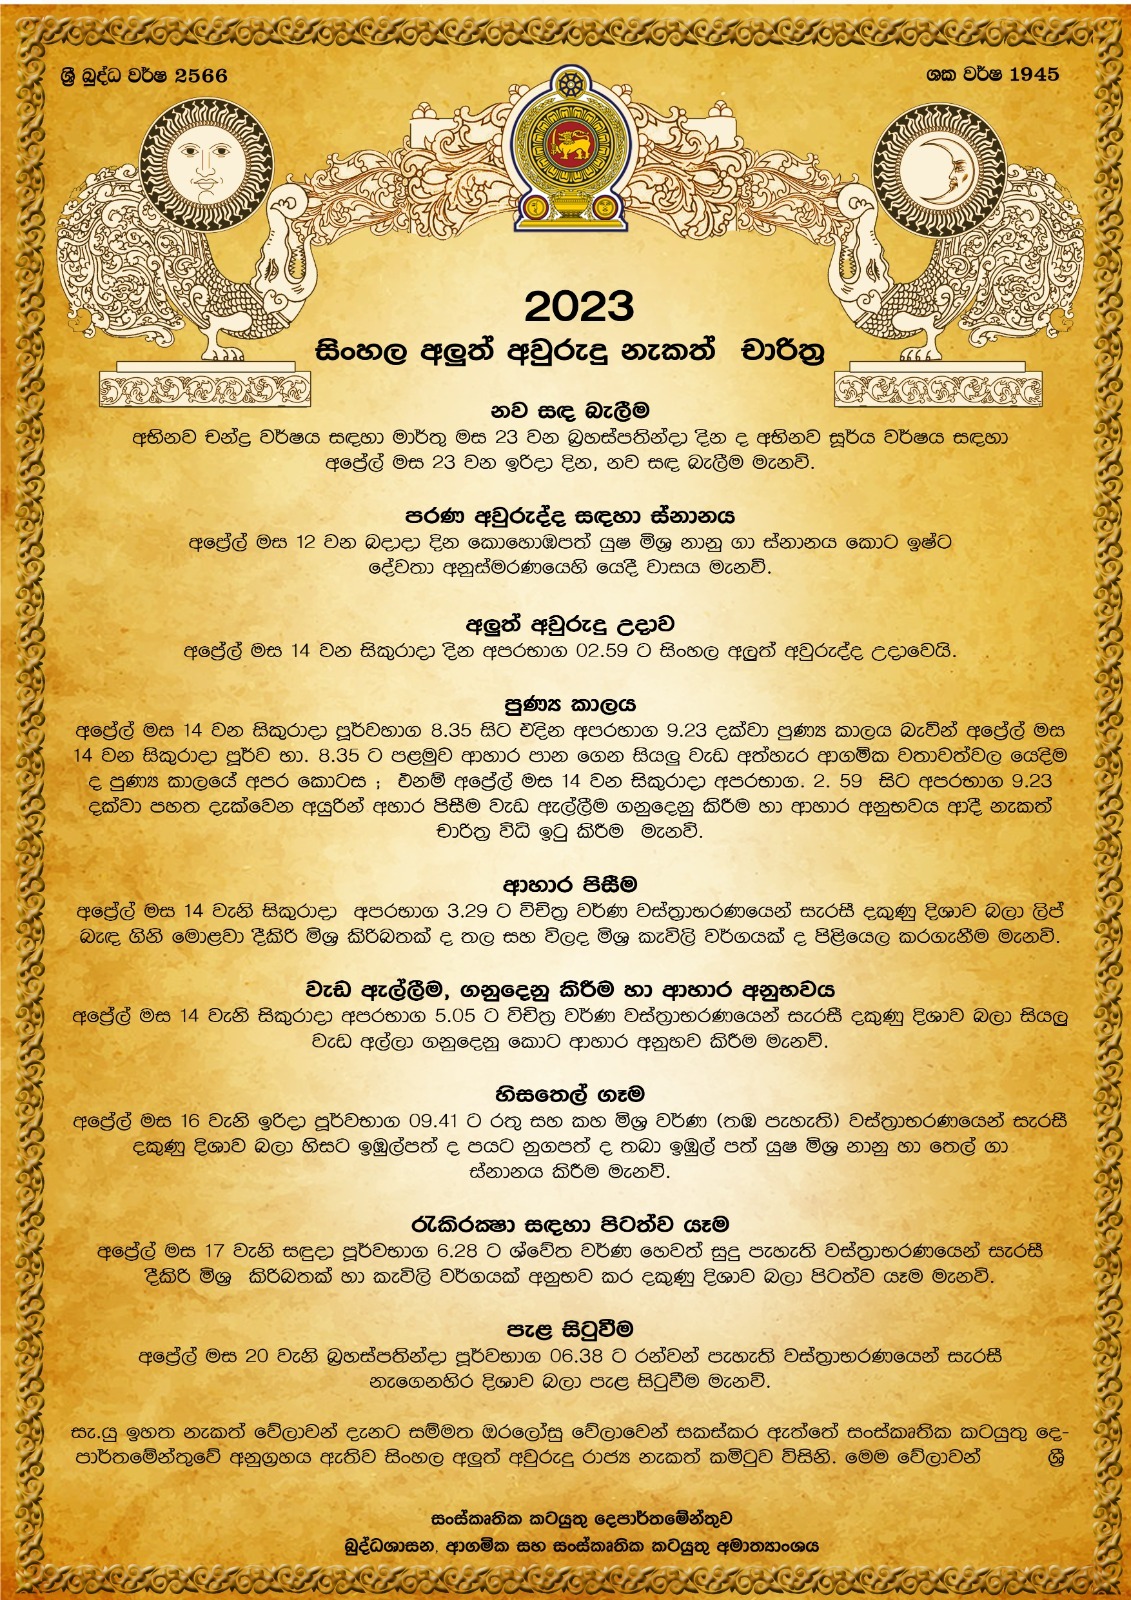 ‘Nekath Seettuwa’, the auspicious times for the New Year presented to